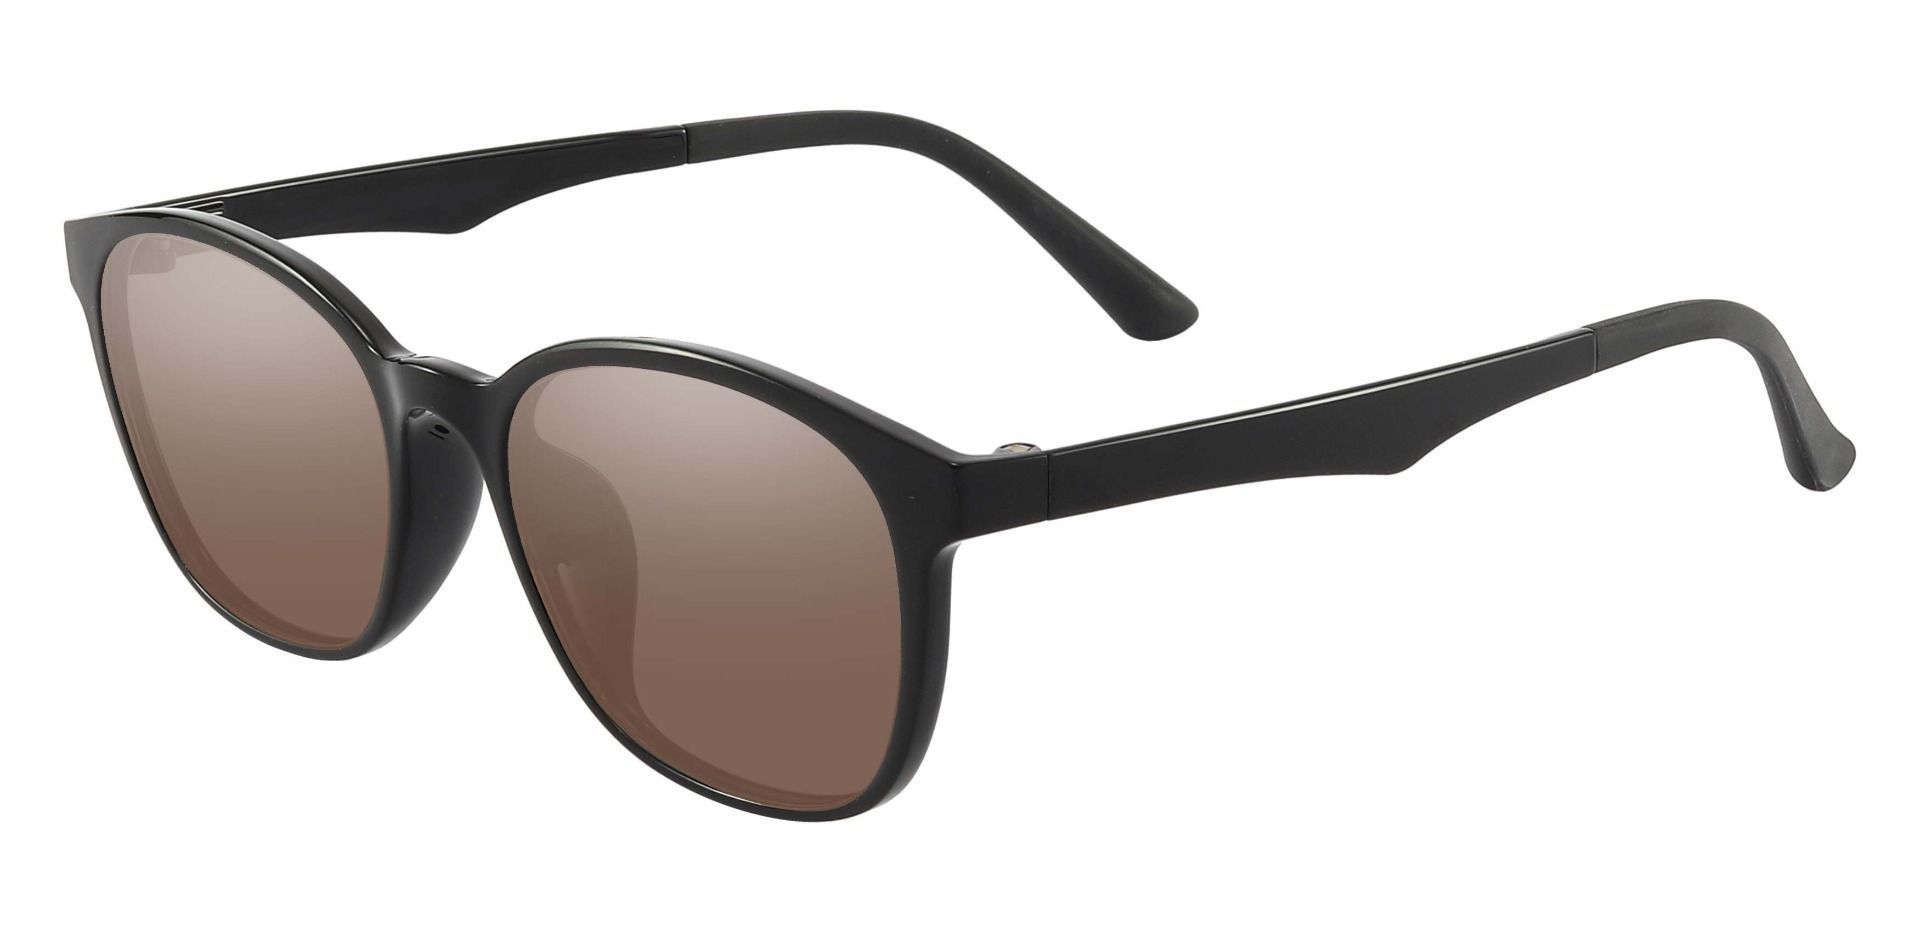 Ursula Oval Reading Sunglasses - Black Frame With Brown Lenses